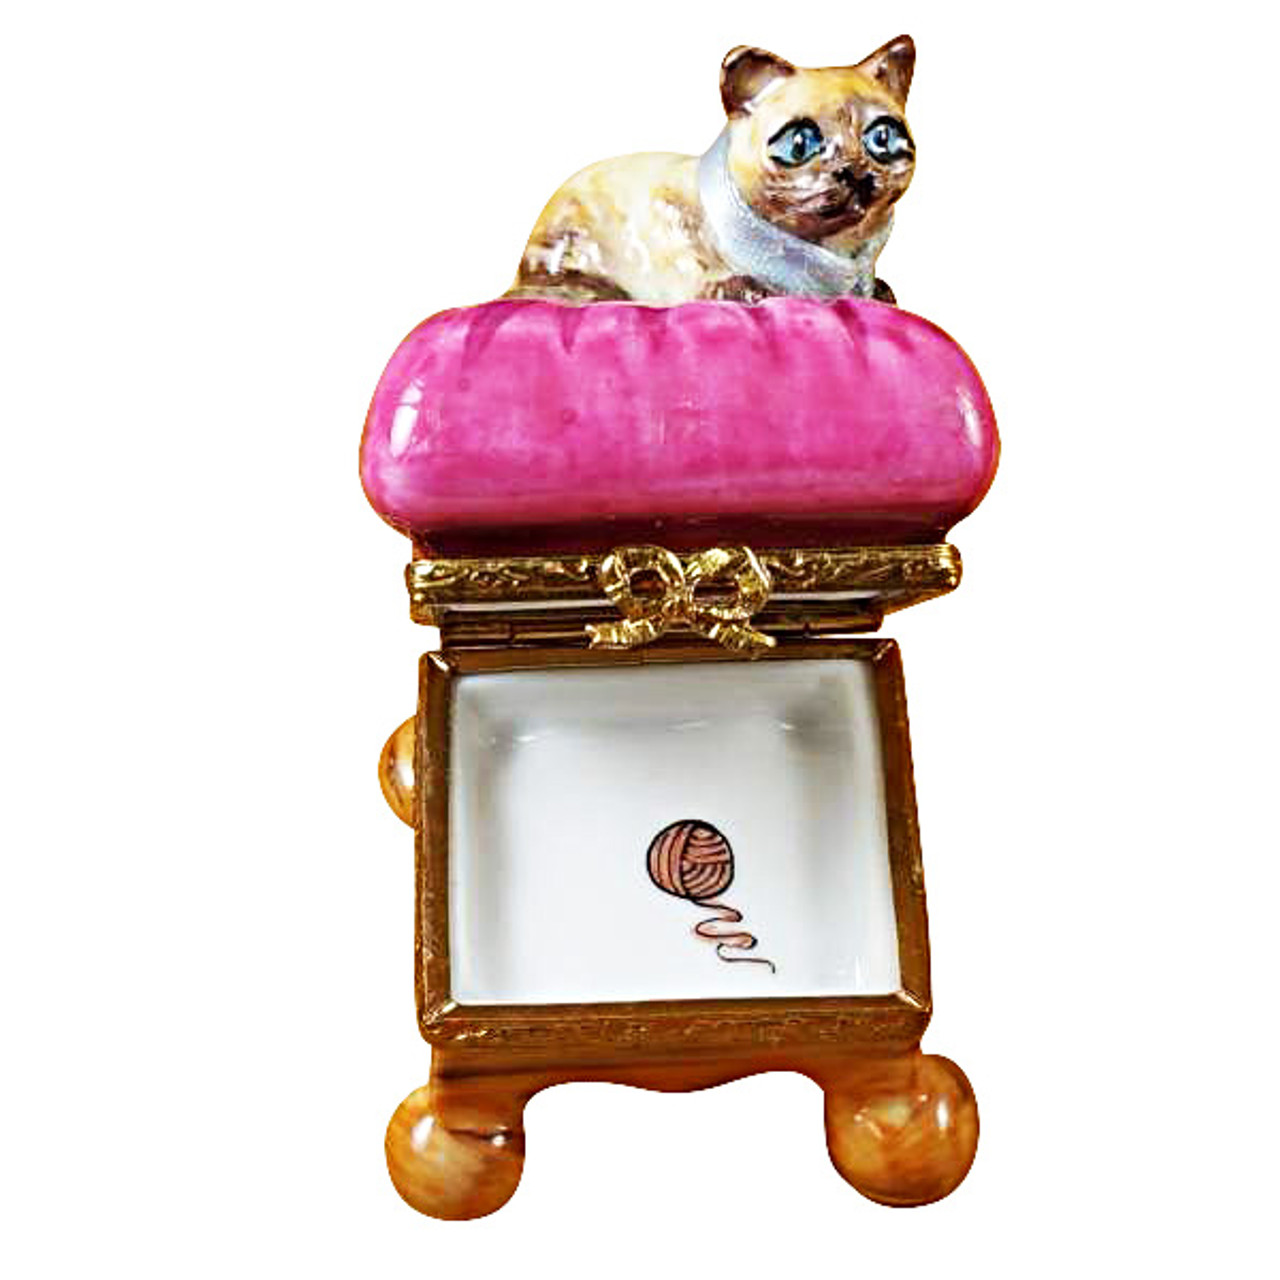 Limoges Imports Cat On Pink Pillow Limoges Box